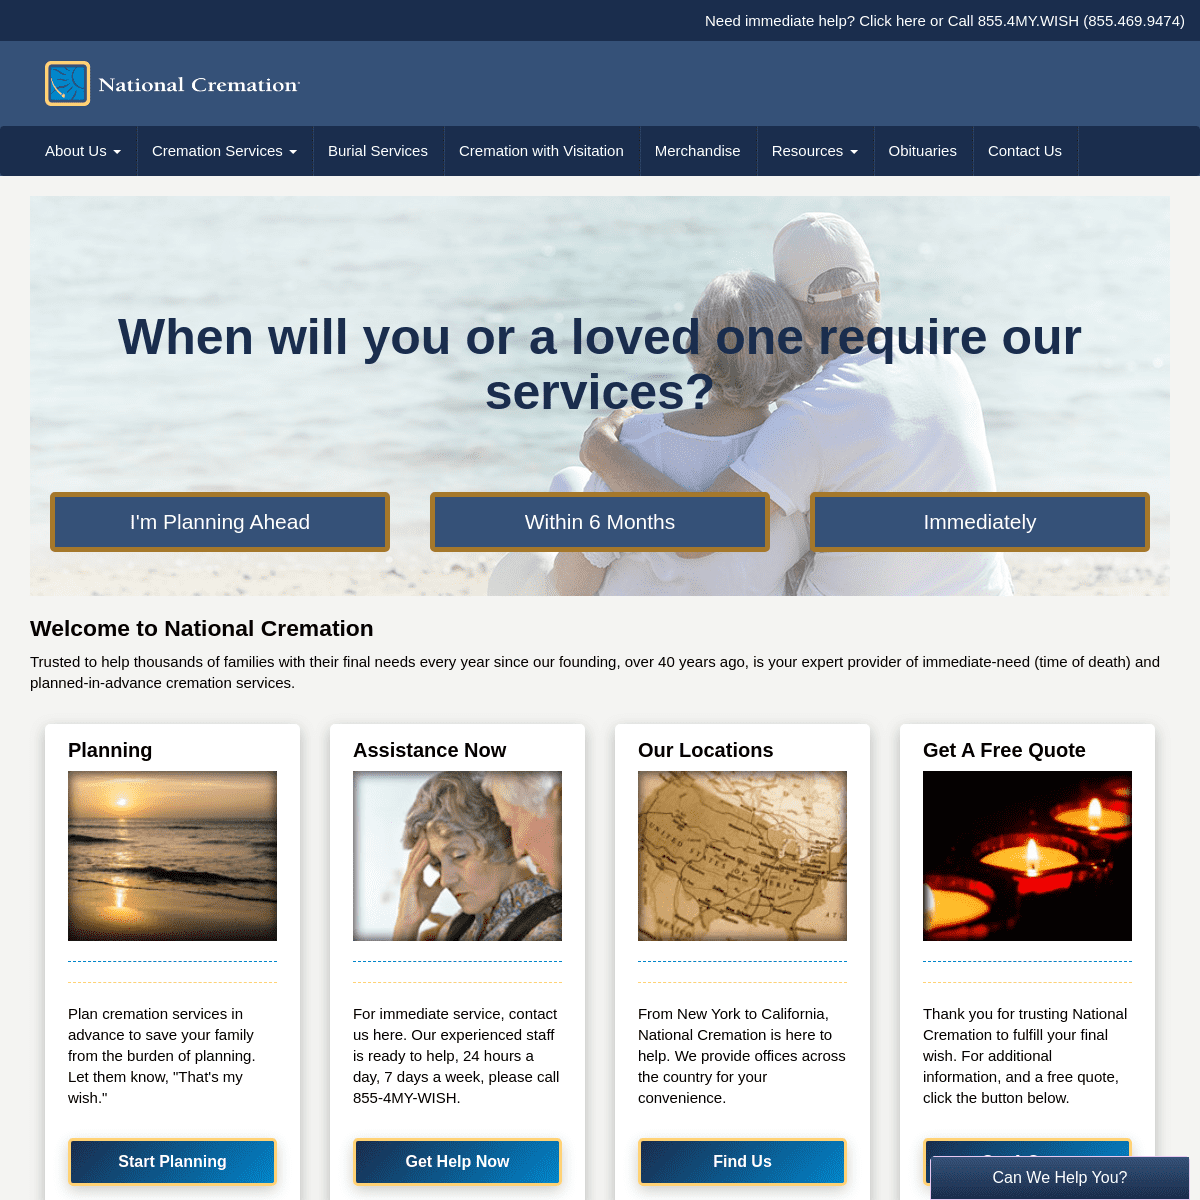 A complete backup of https://nationalcremation.com